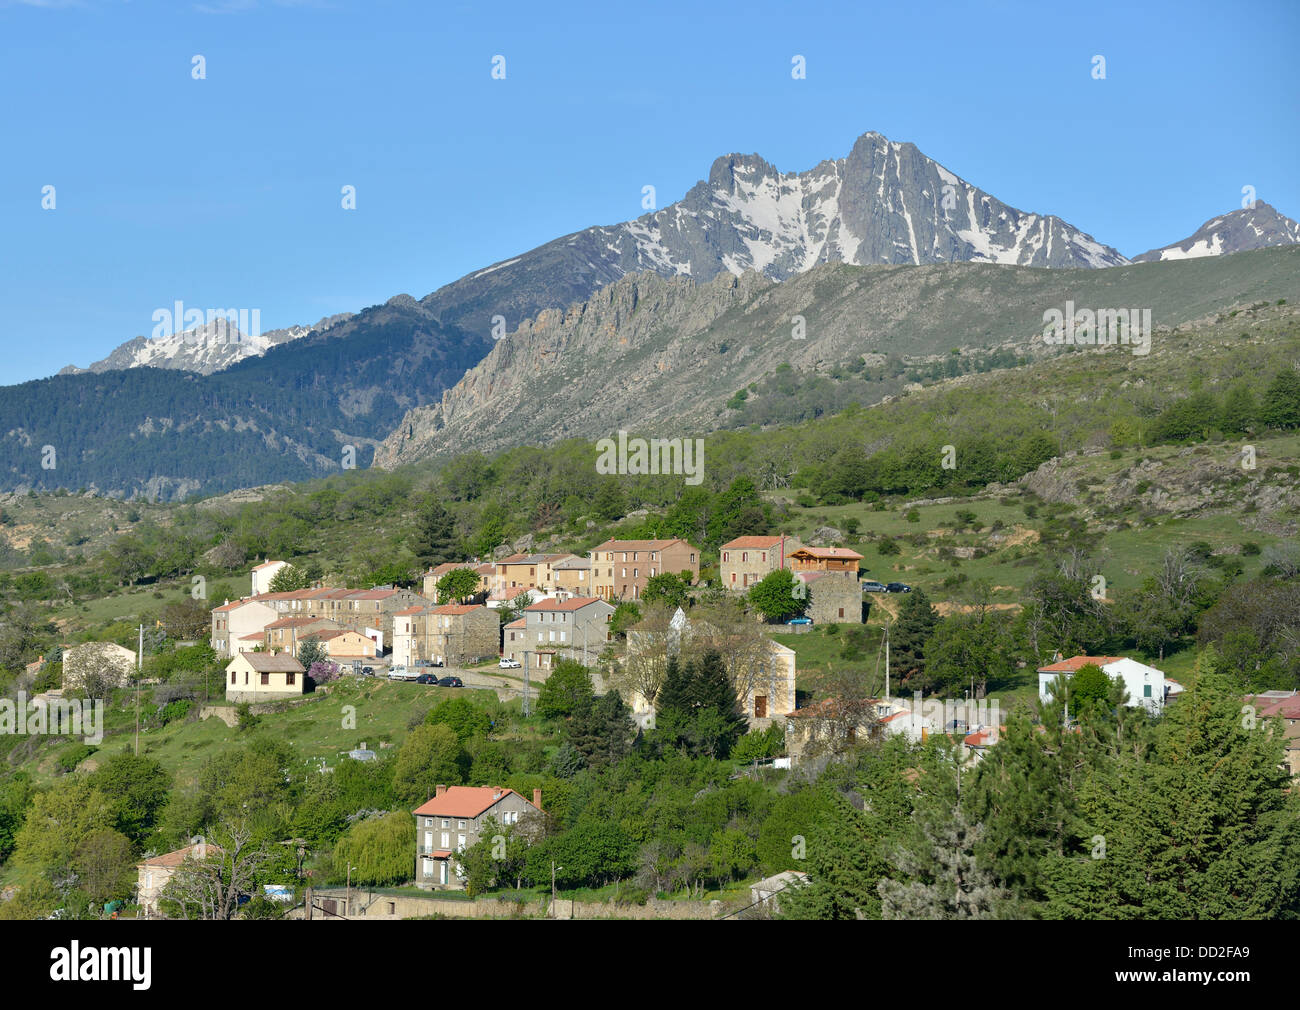 Aerial view of village of Calacuccia, Niolo Valley, Central Massif, Corsica, France Stock Photo